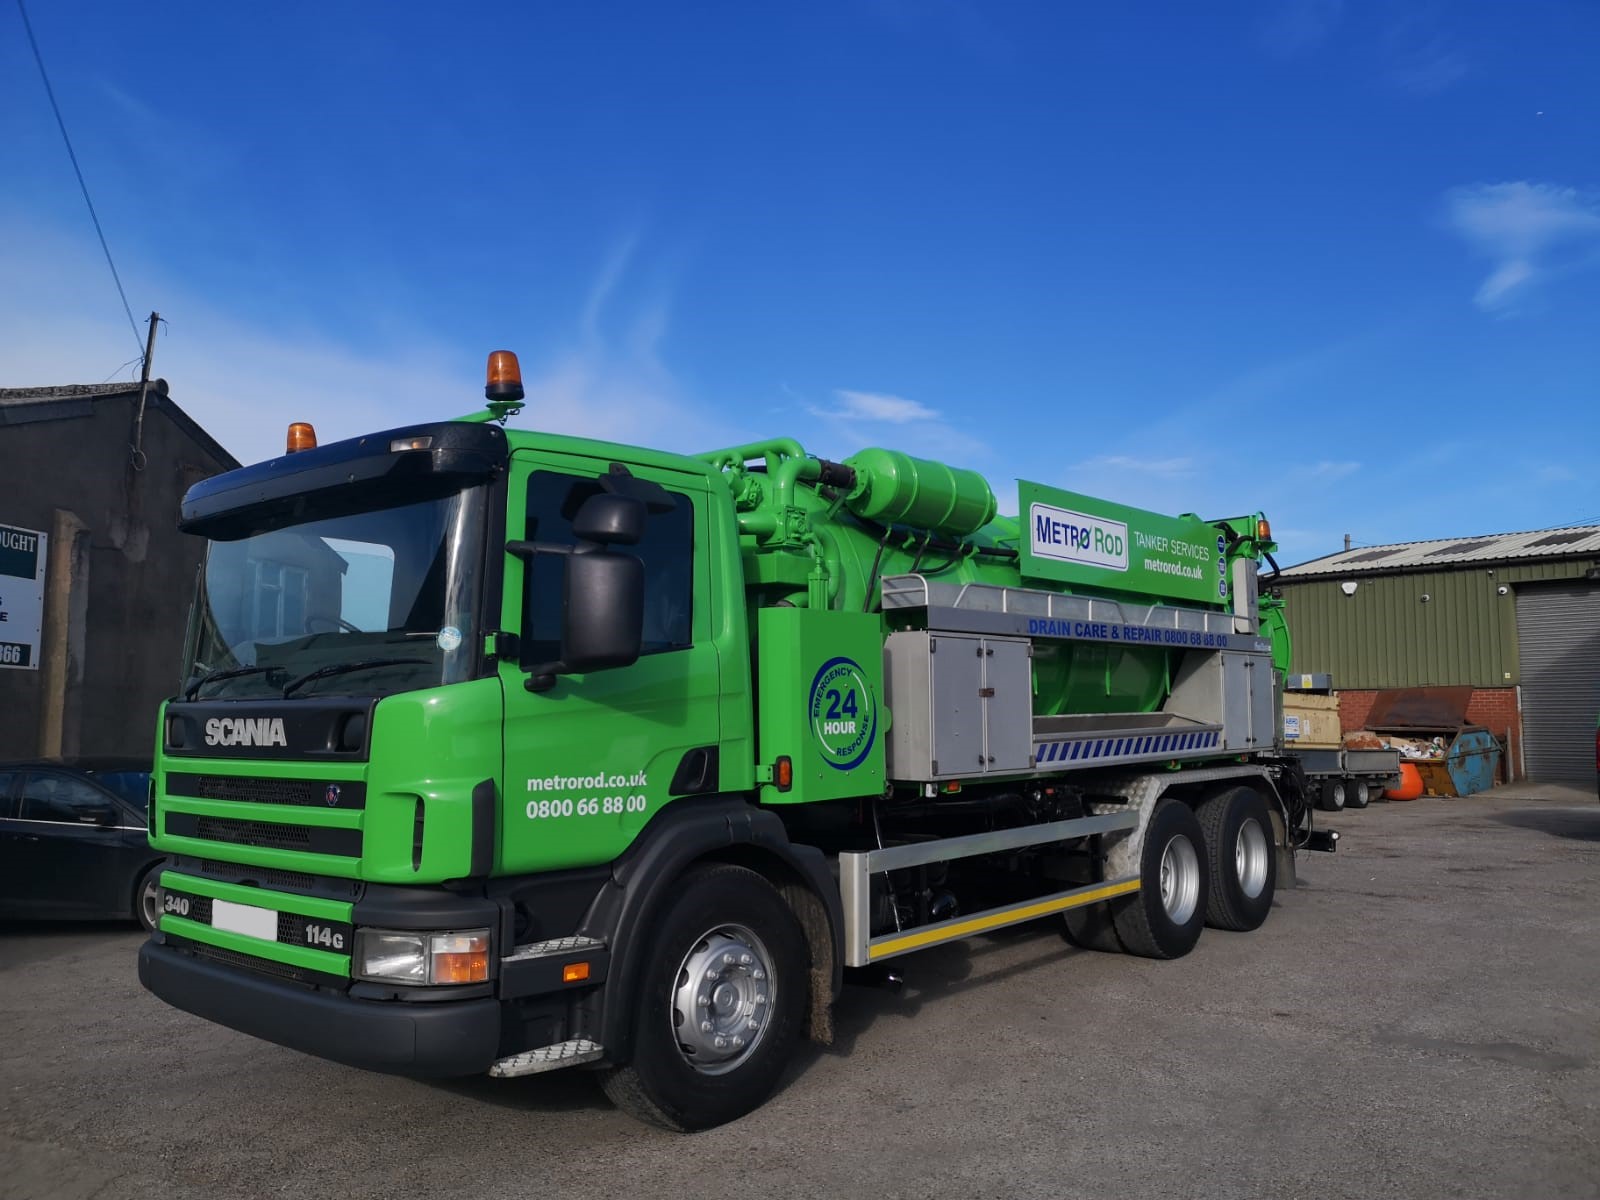 Investing in Drainage Solutions with Specialist Equipment – Metro Rod Manchester